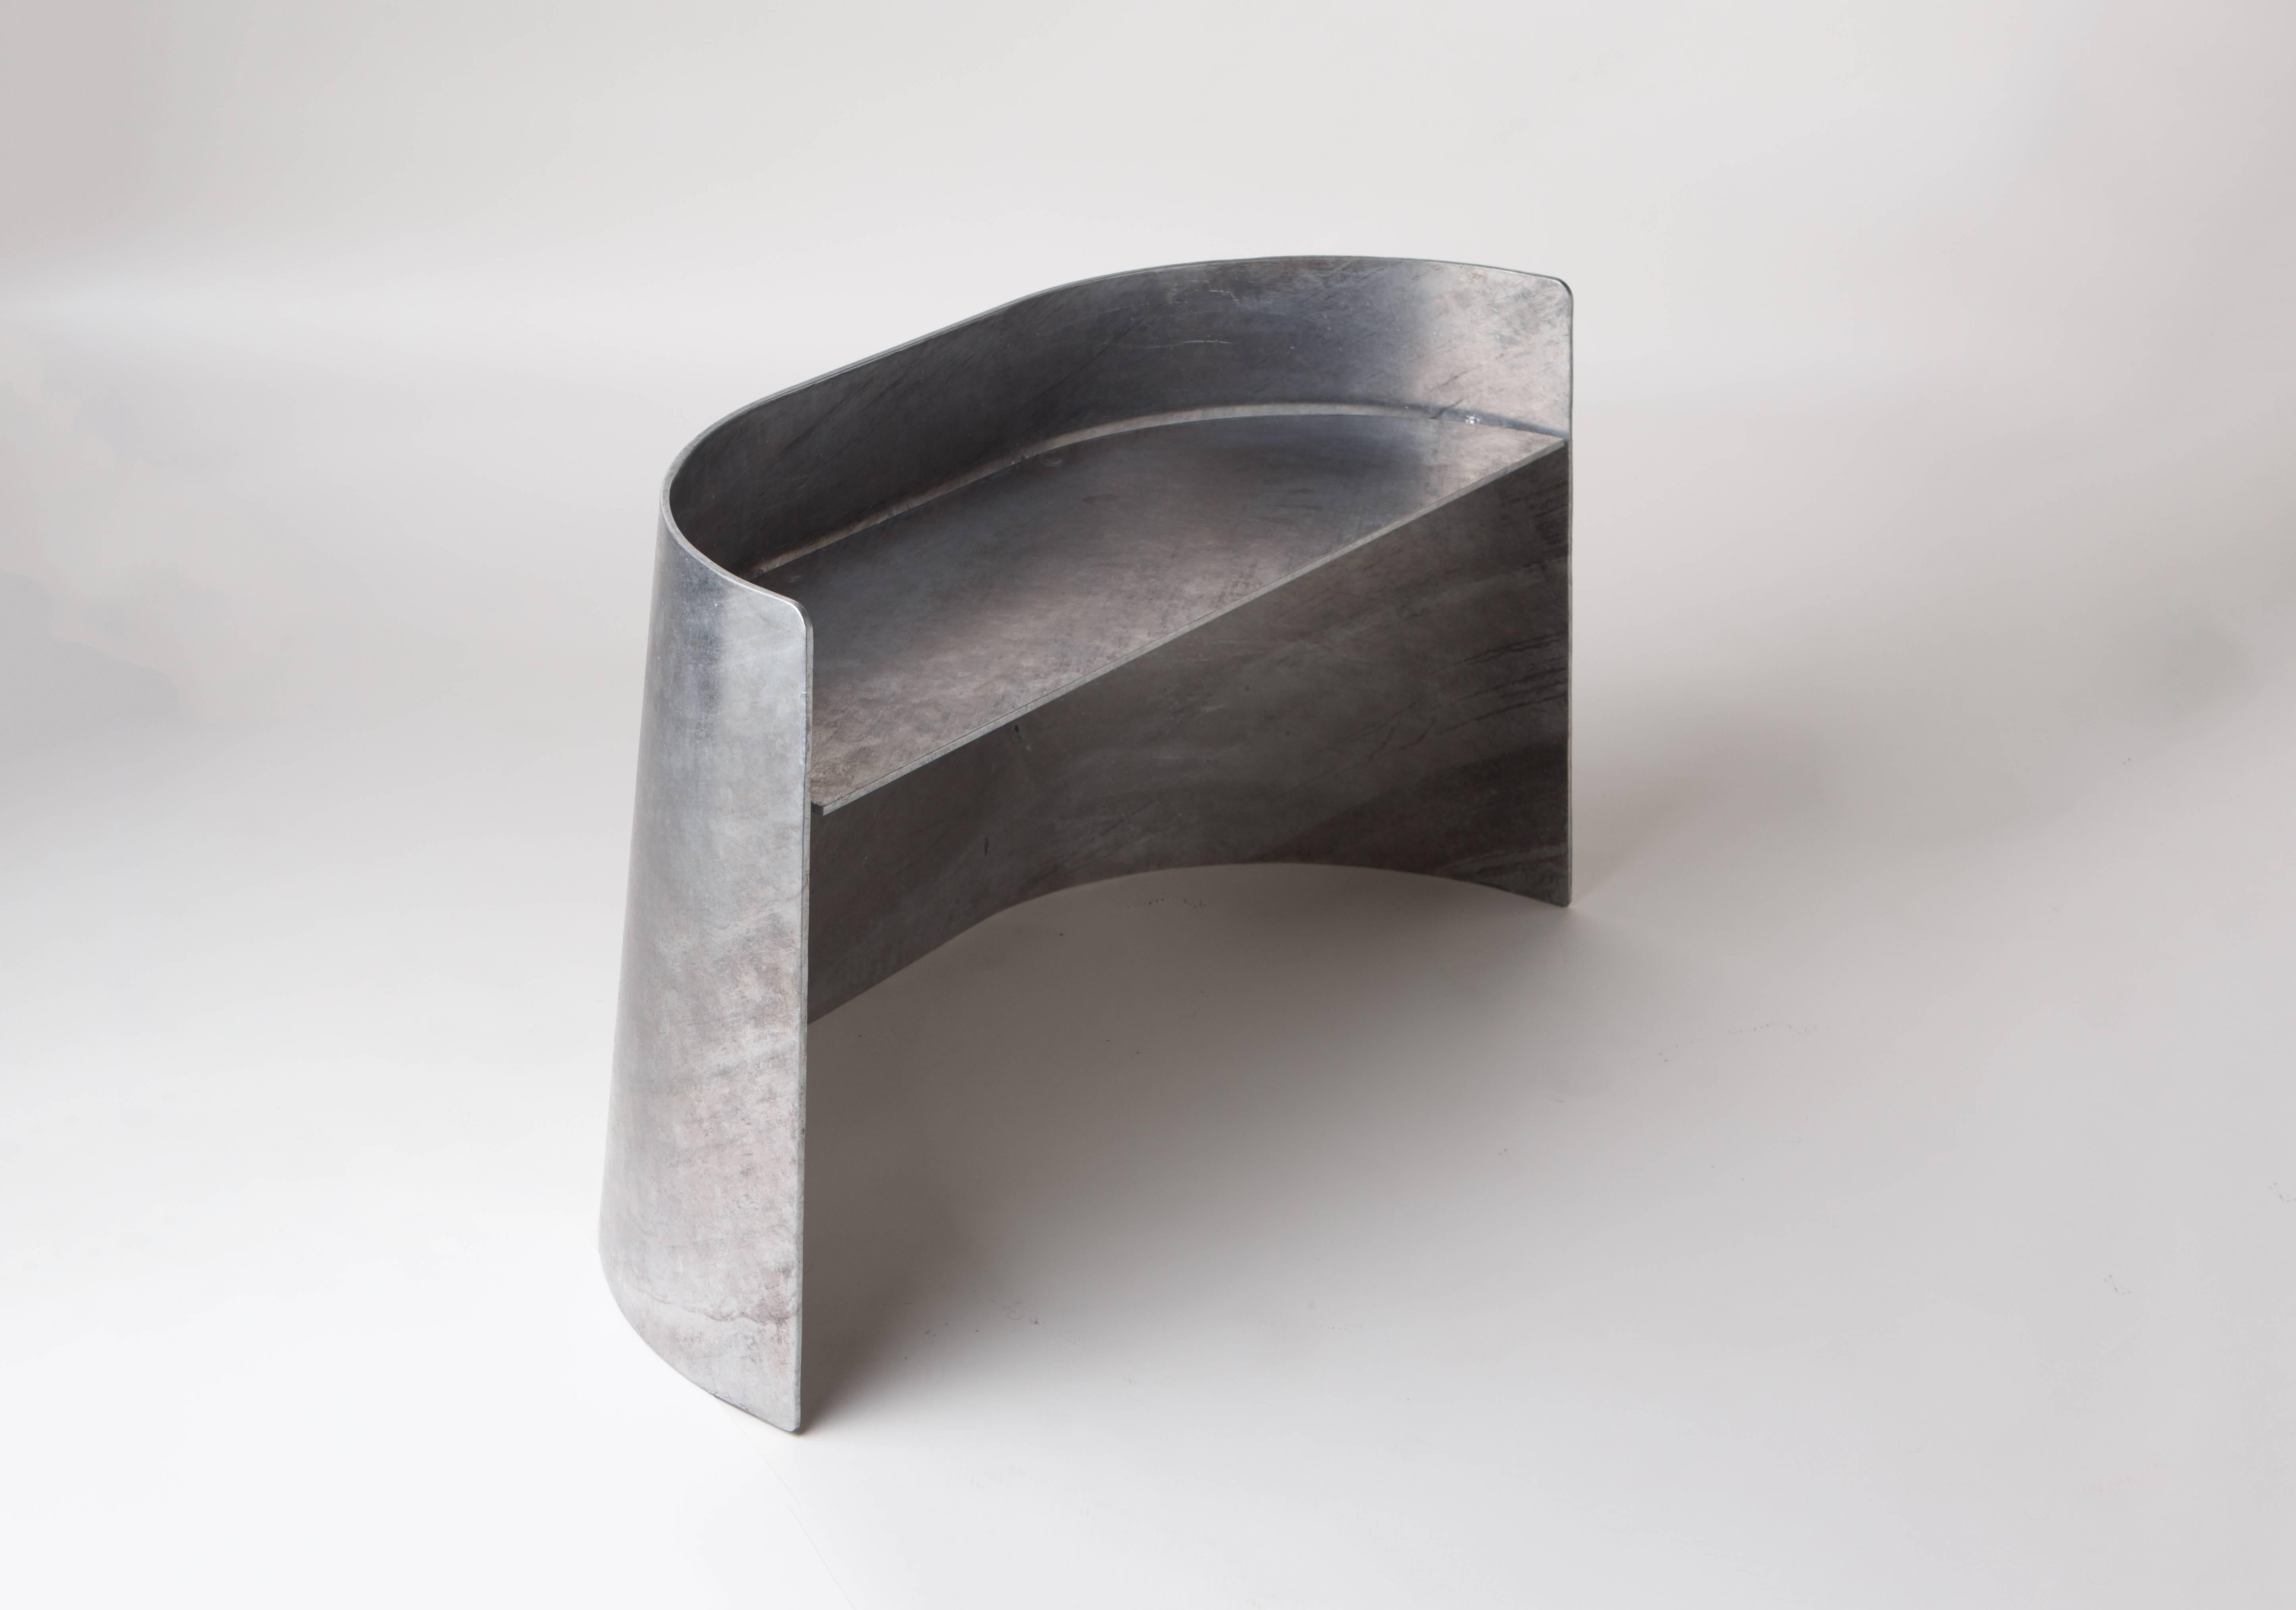 The Sentry bench, originally commissioned by New York interior designer Charlie Ferrer, makes a perfect entryway sculptural seat. Made of laser-cut and hand-rolled .25 inch thick steel with floating welded seat perch. The finish is produced by